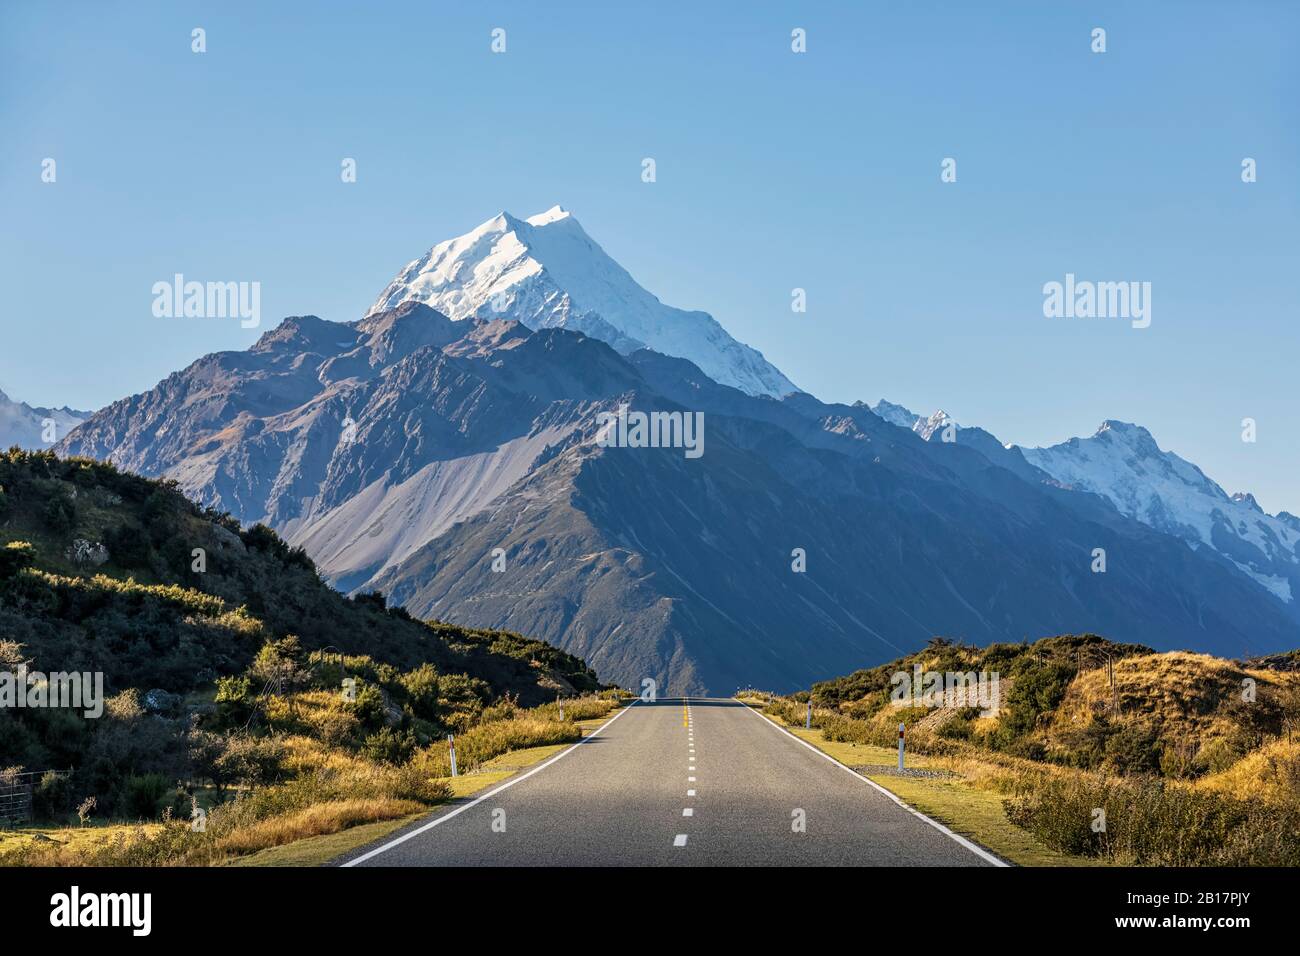 New Zealand, Oceania, South Island, Canterbury, Ben Ohau, Southern Alps (New Zealand Alps), Mount Cook National Park, Mount Cook Road and Aoraki / Mount Cook, Empty road in mountain landscape Stock Photo